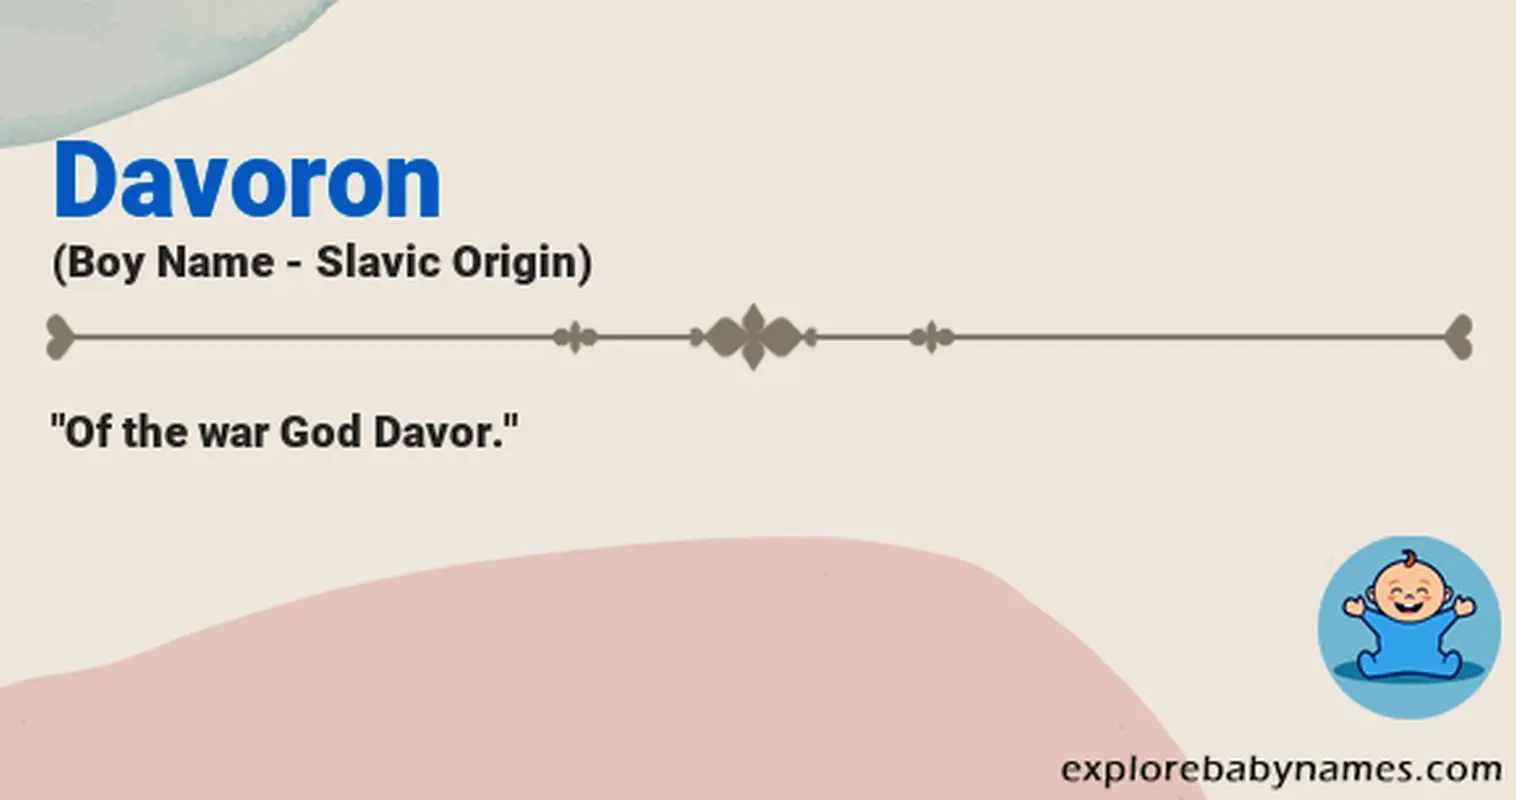 Meaning of Davoron